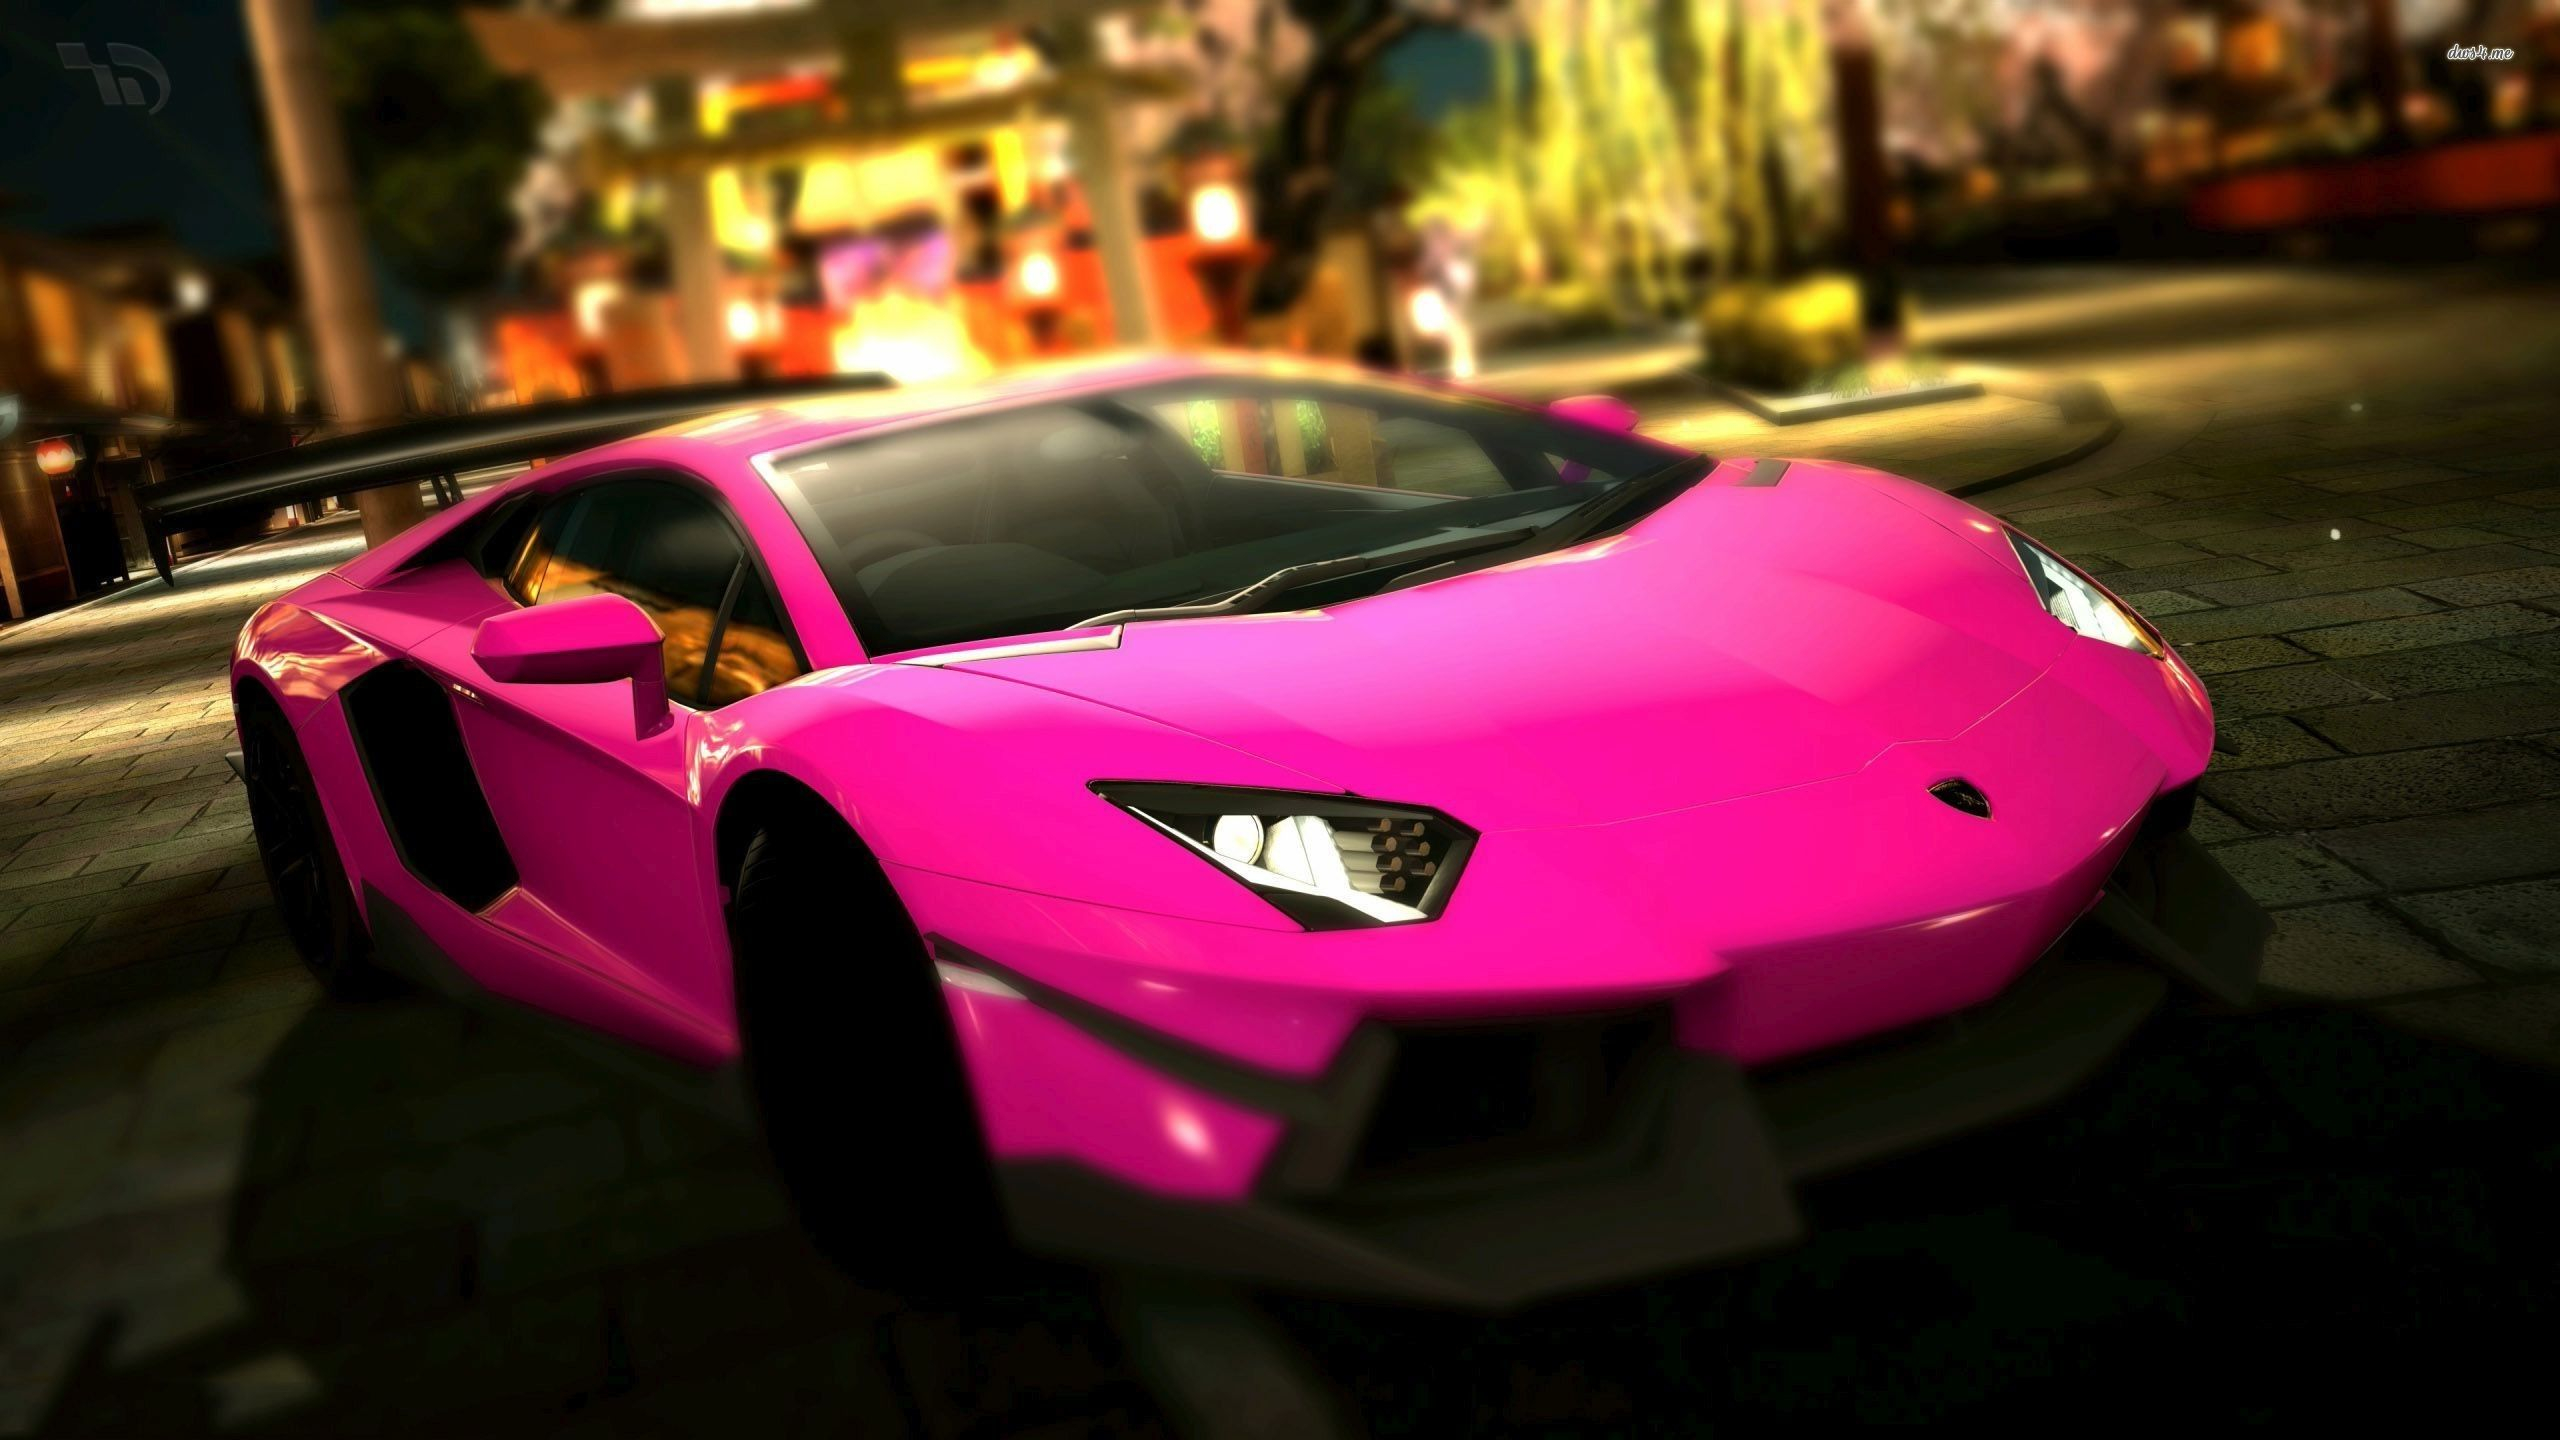 2560x1440 Pink Car Wallpapers Top Free Pink Car Backgrounds